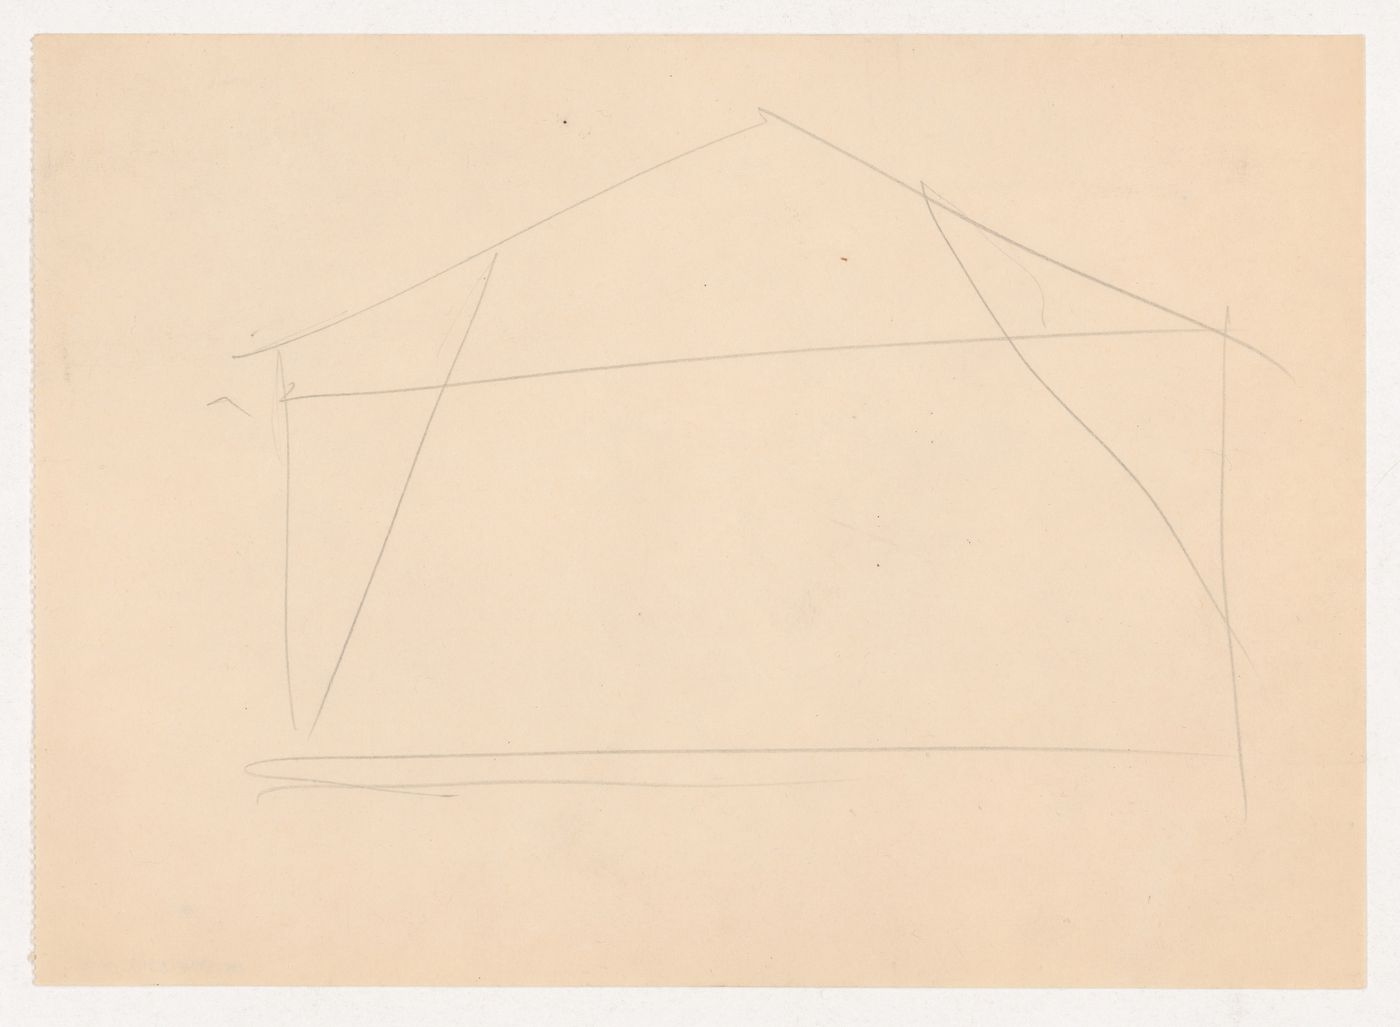 Unidentified sketch, possibly for the Metallurgy Building, Illinois Institute of Technology, Chicago